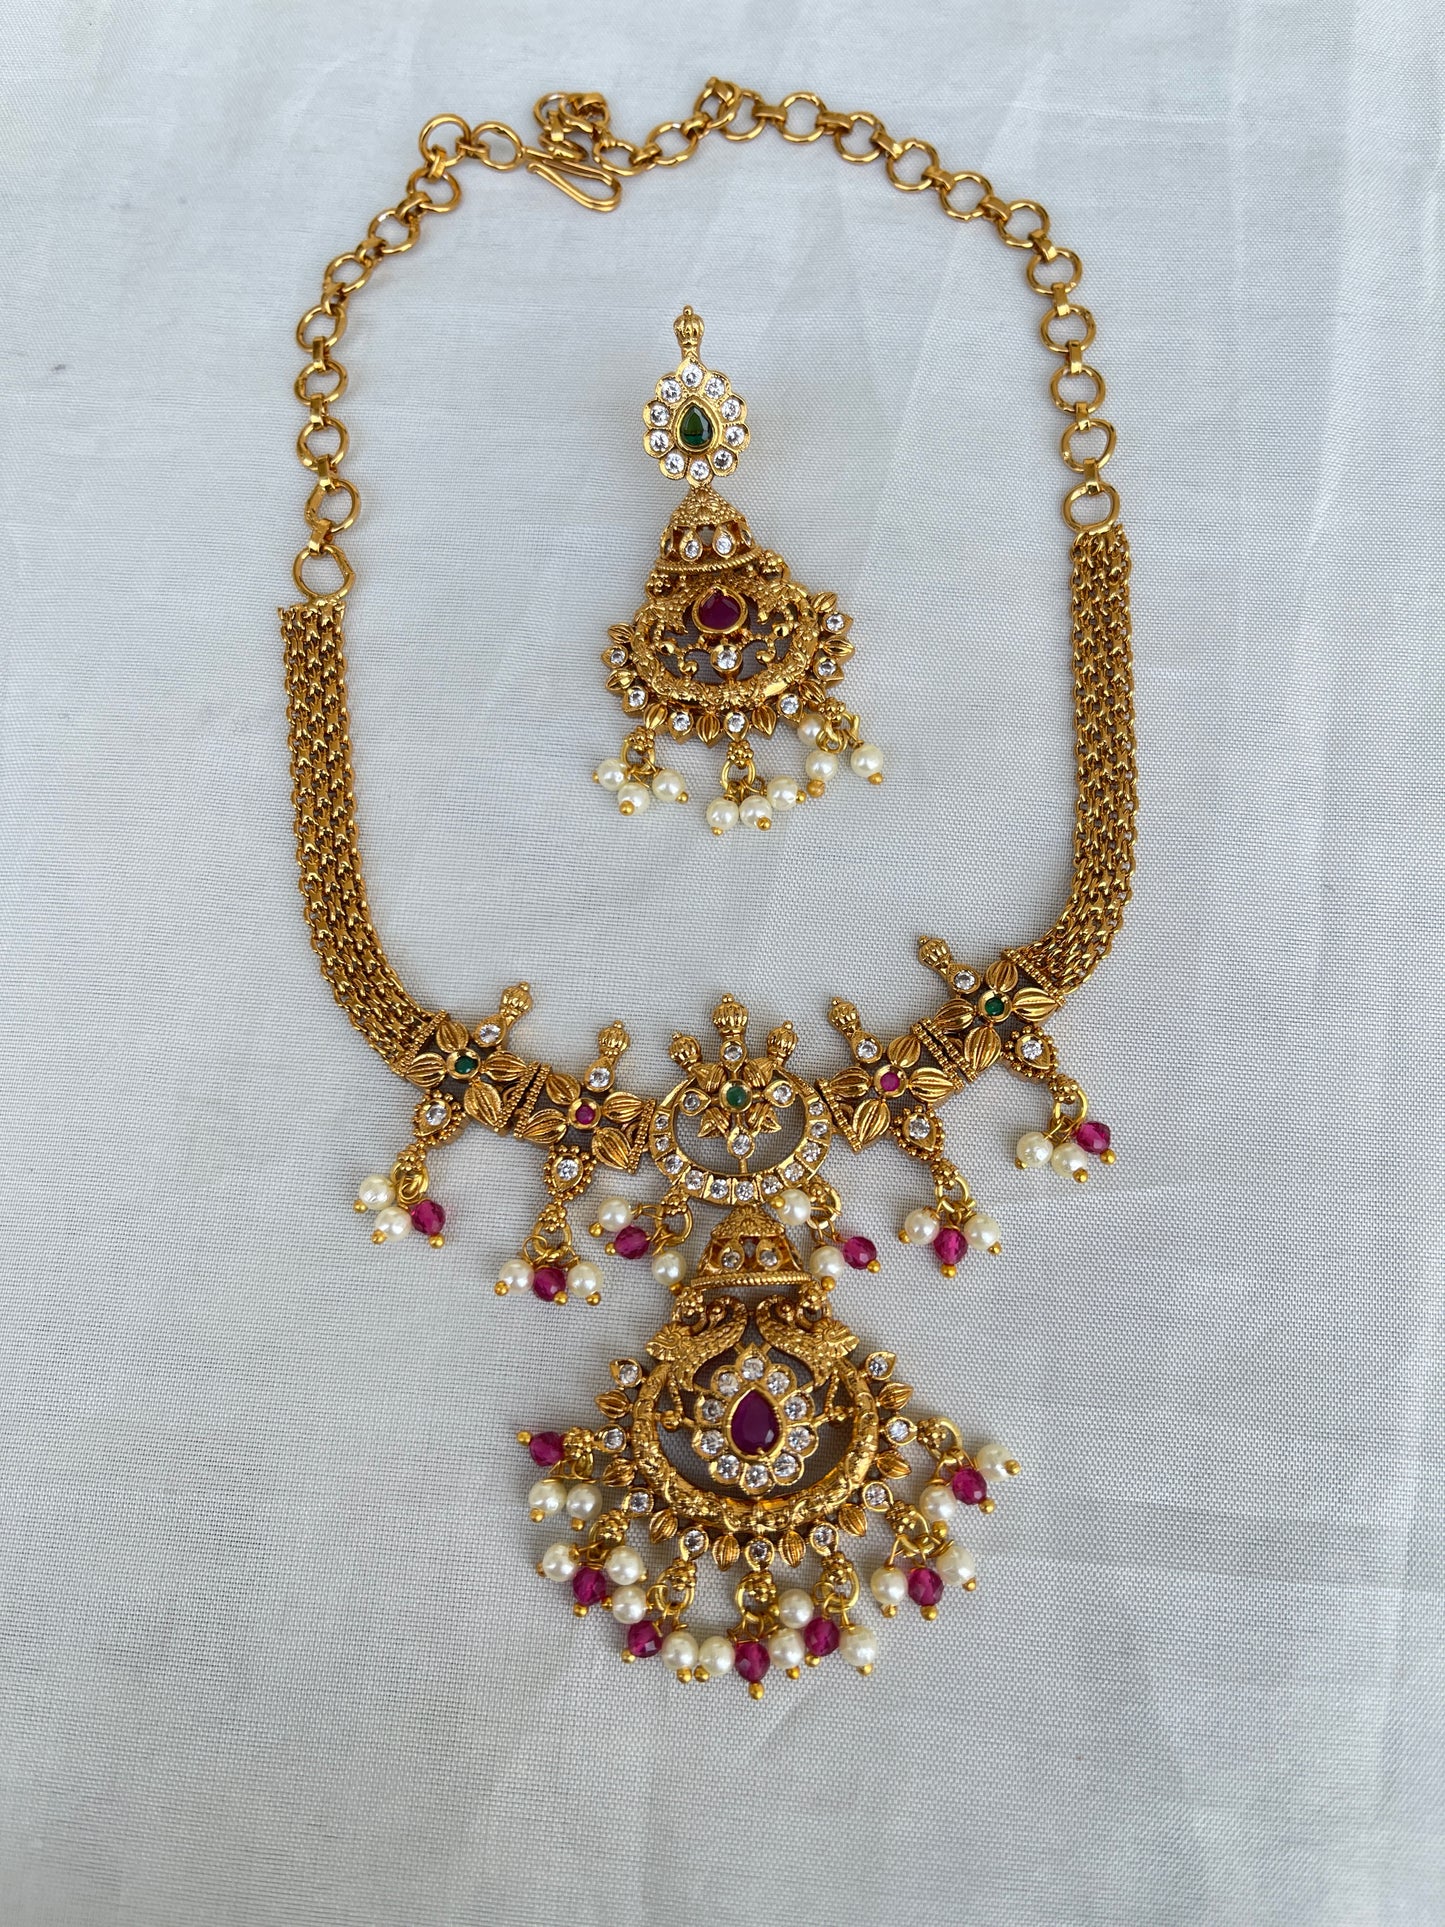 Chandbali neckset in pink and white color